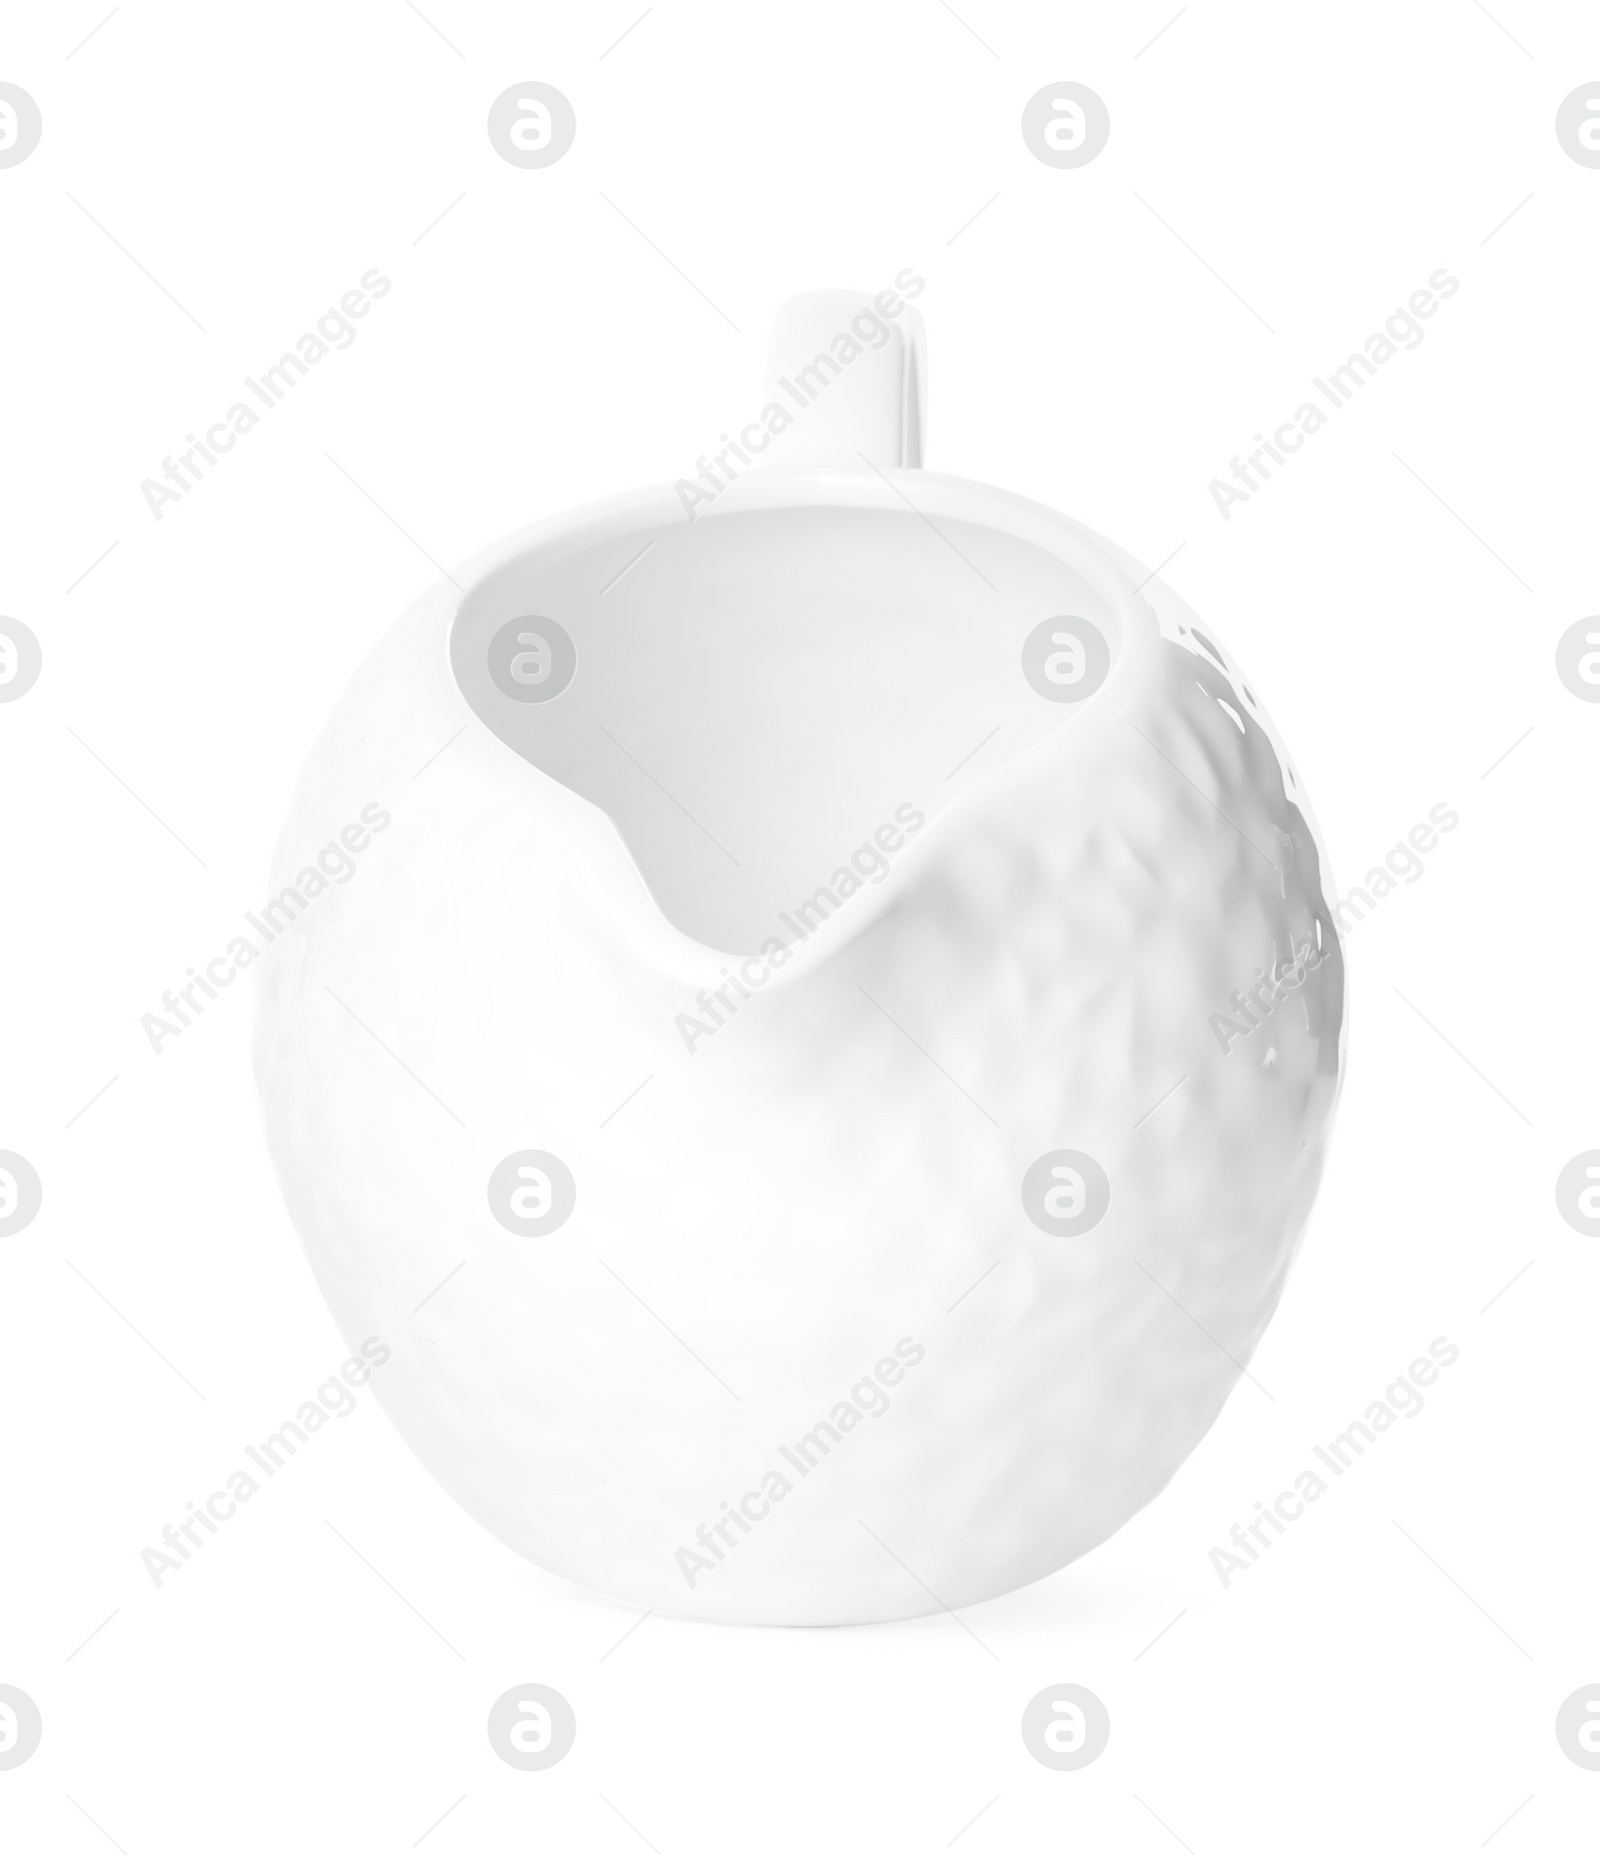 Photo of Clean empty ceramic sauce jug isolated on white